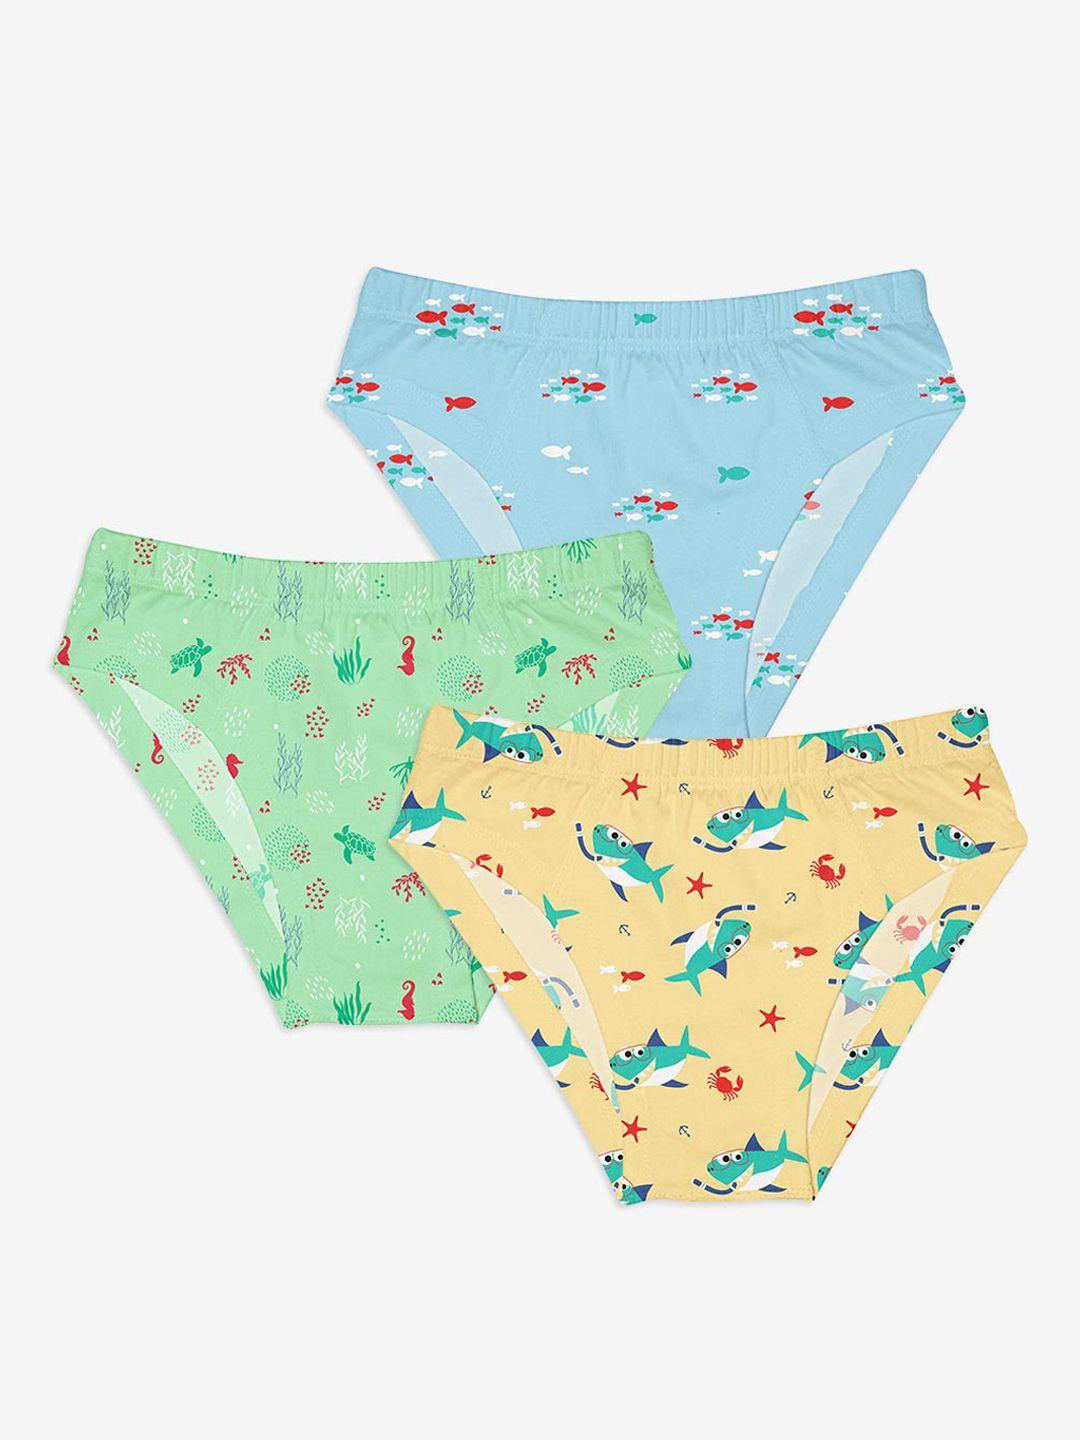 superbottoms-boys-pack-of-3-printed-sustainable-briefs